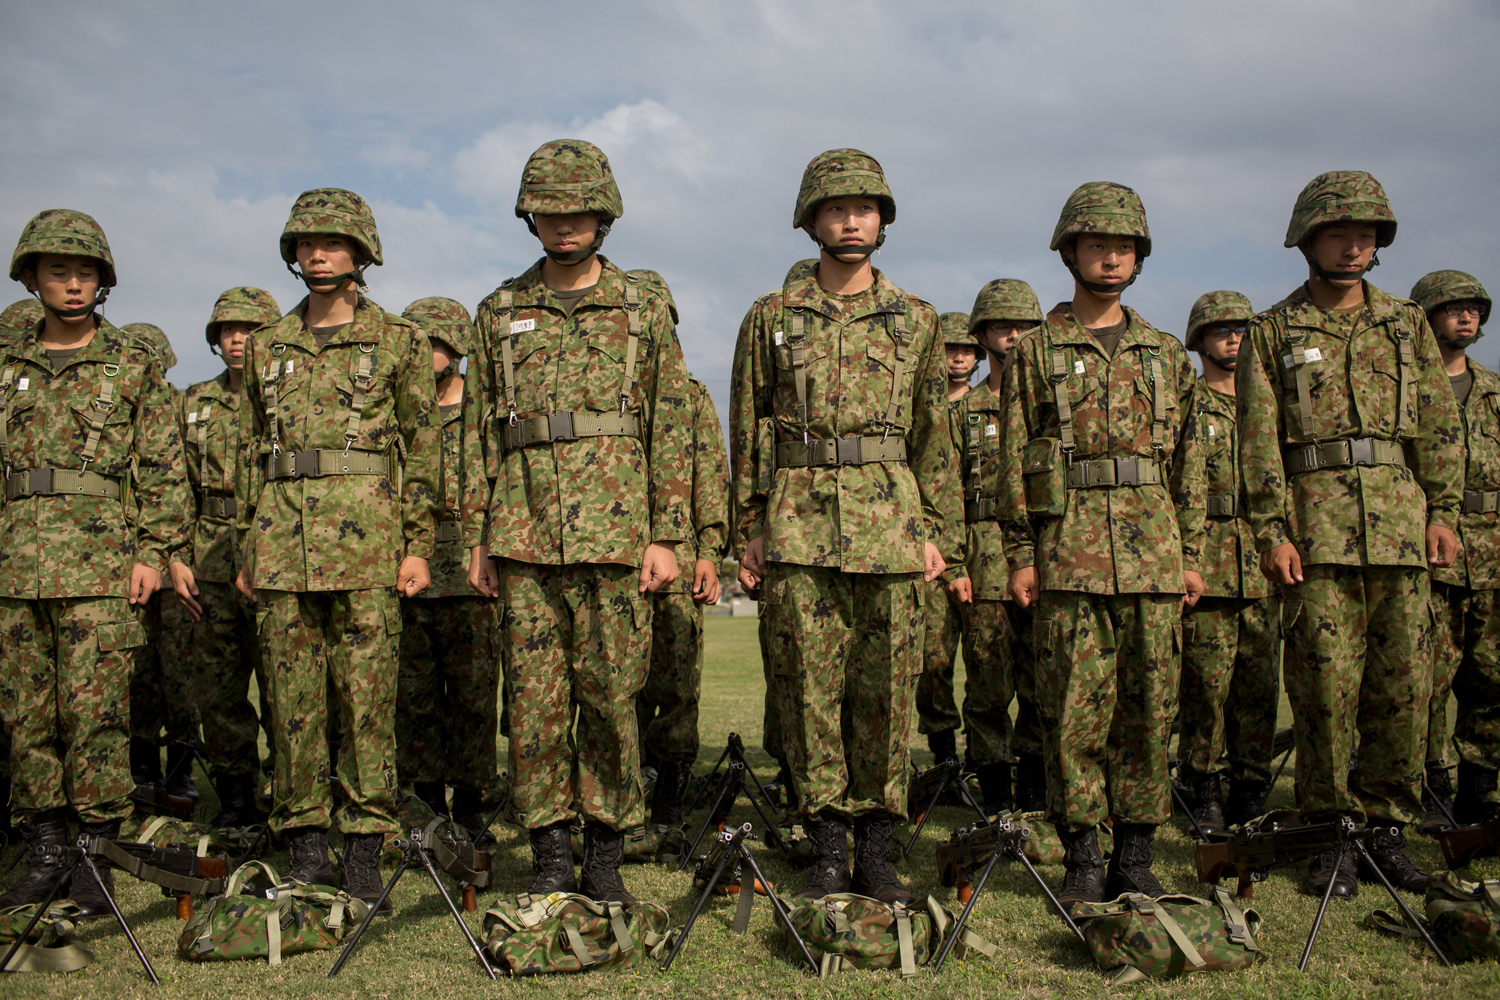 Students listen to instructions during rifle training at the Japan Ground Self-Defense Force High Technical School on Sept. 17, 2014 in Yokosuka, Japan.